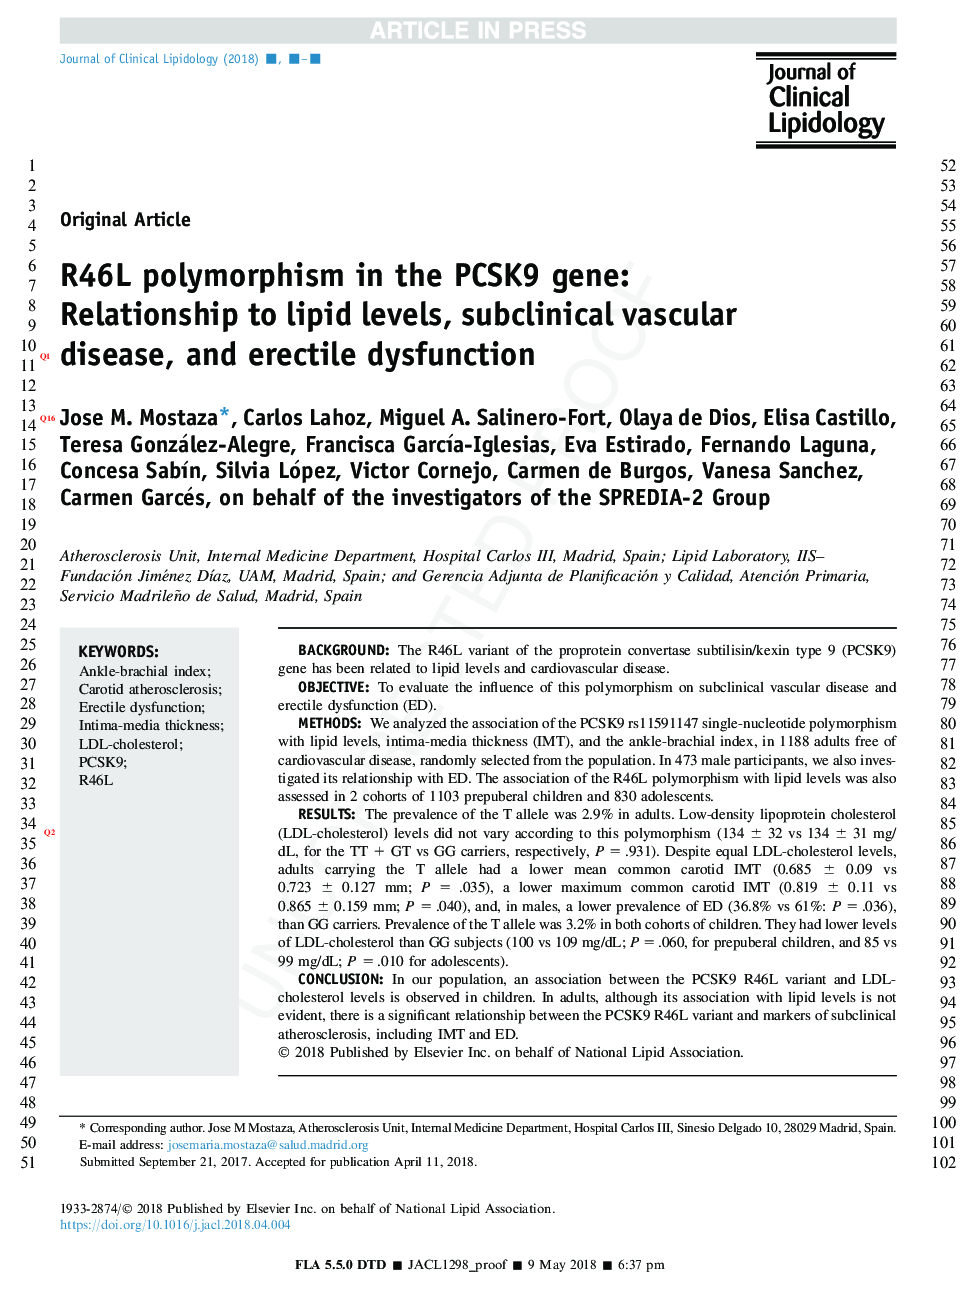 R46L polymorphism in the PCSK9 gene: Relationship to lipid levels, subclinical vascular disease, and erectile dysfunction